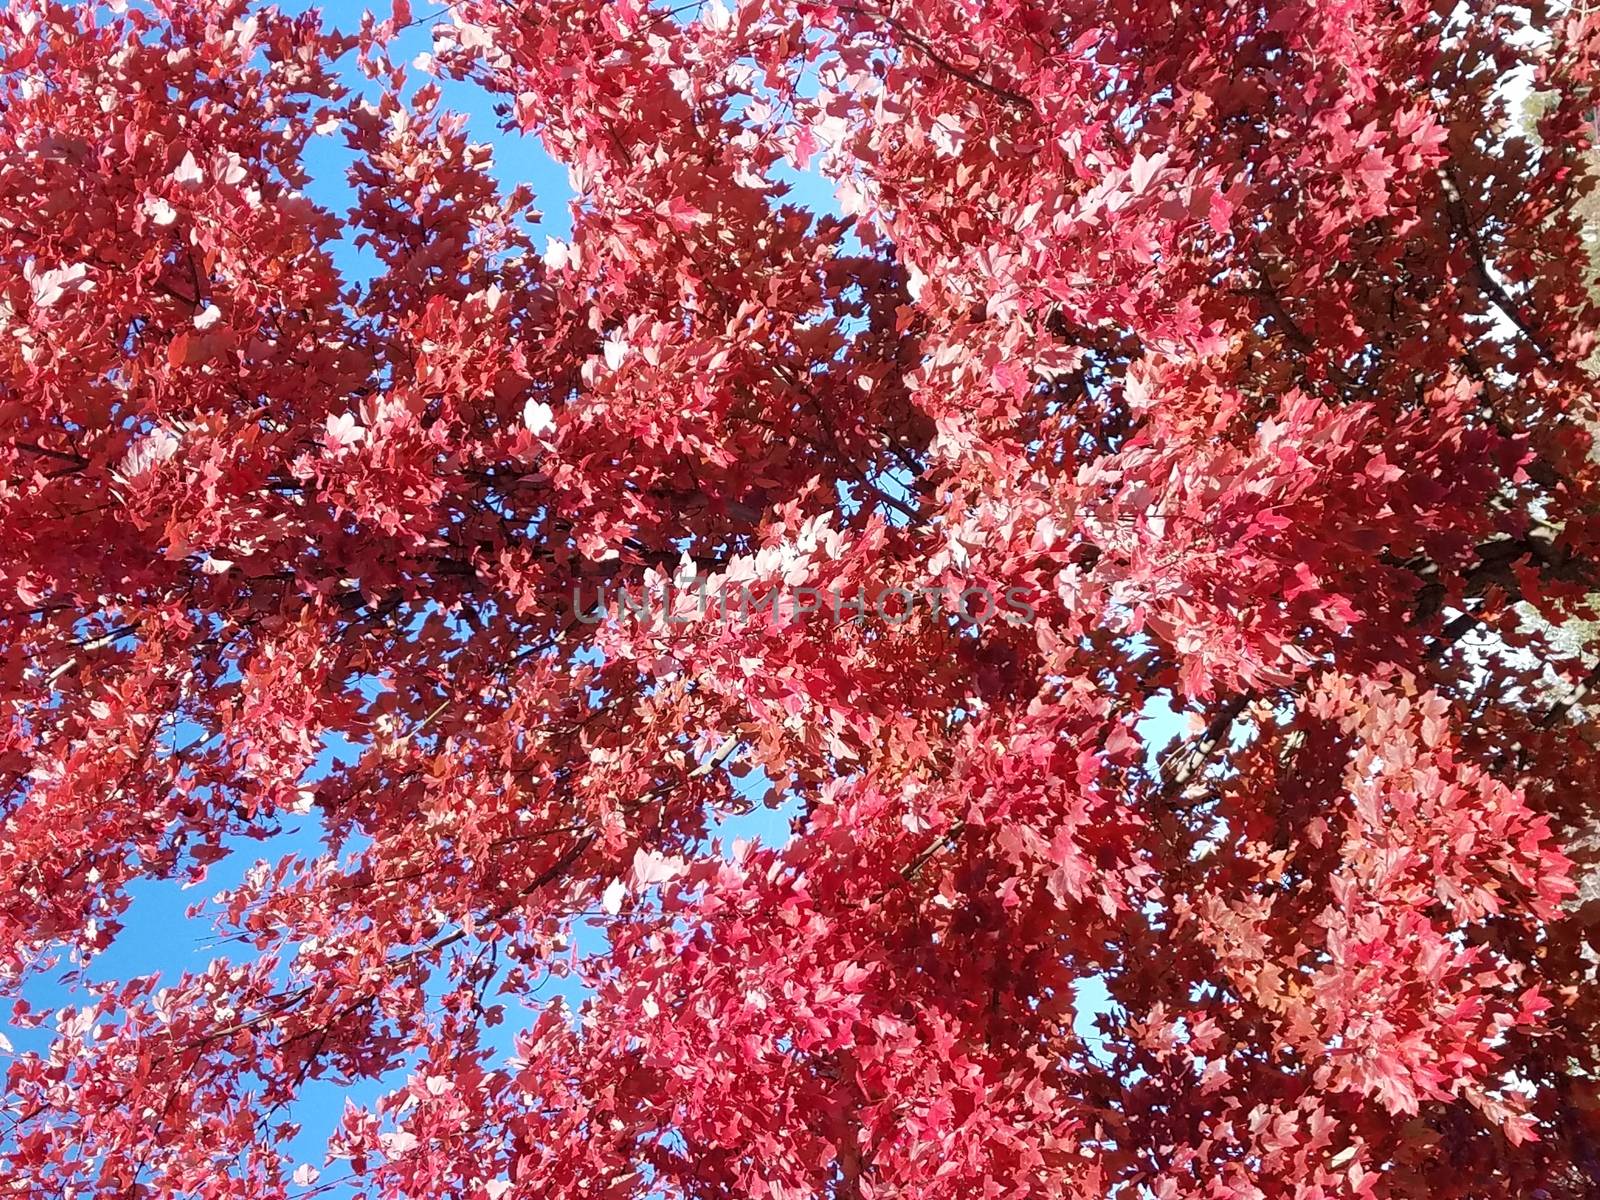 tall tree with red leaves or foliage by stockphotofan1